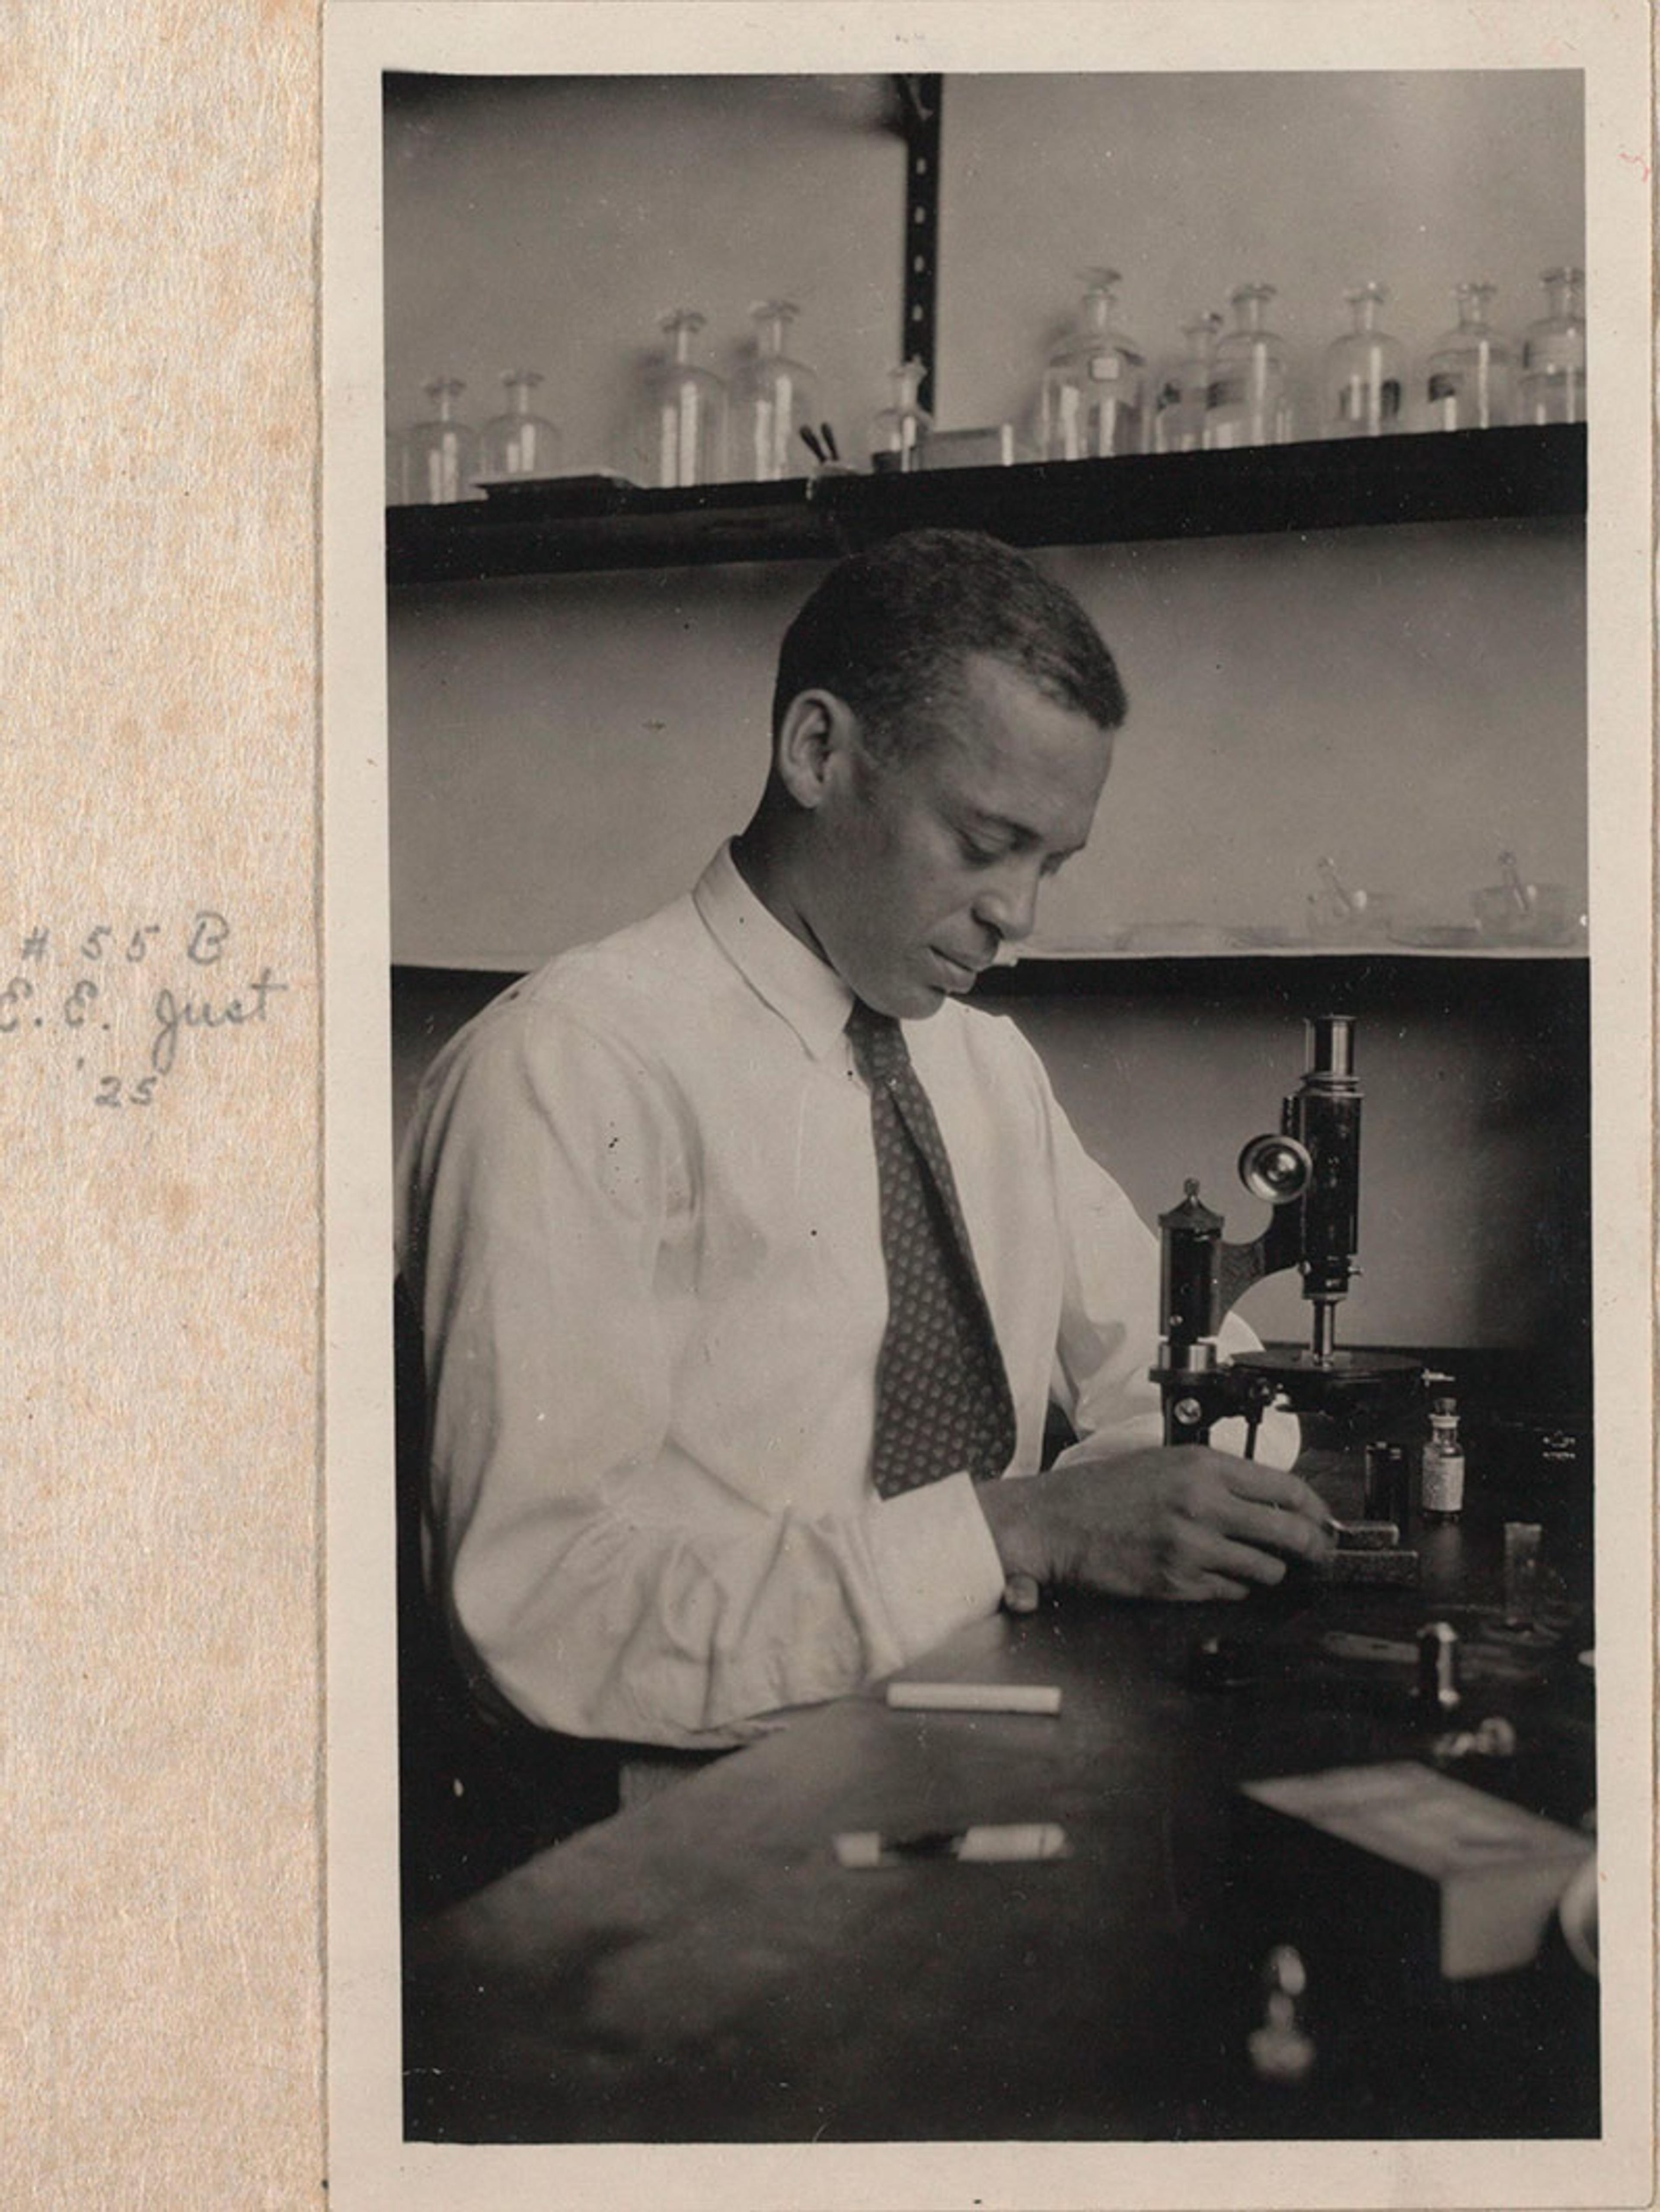 An African American scientist at work in a lab with a microscope. The image is an older print within a photo album